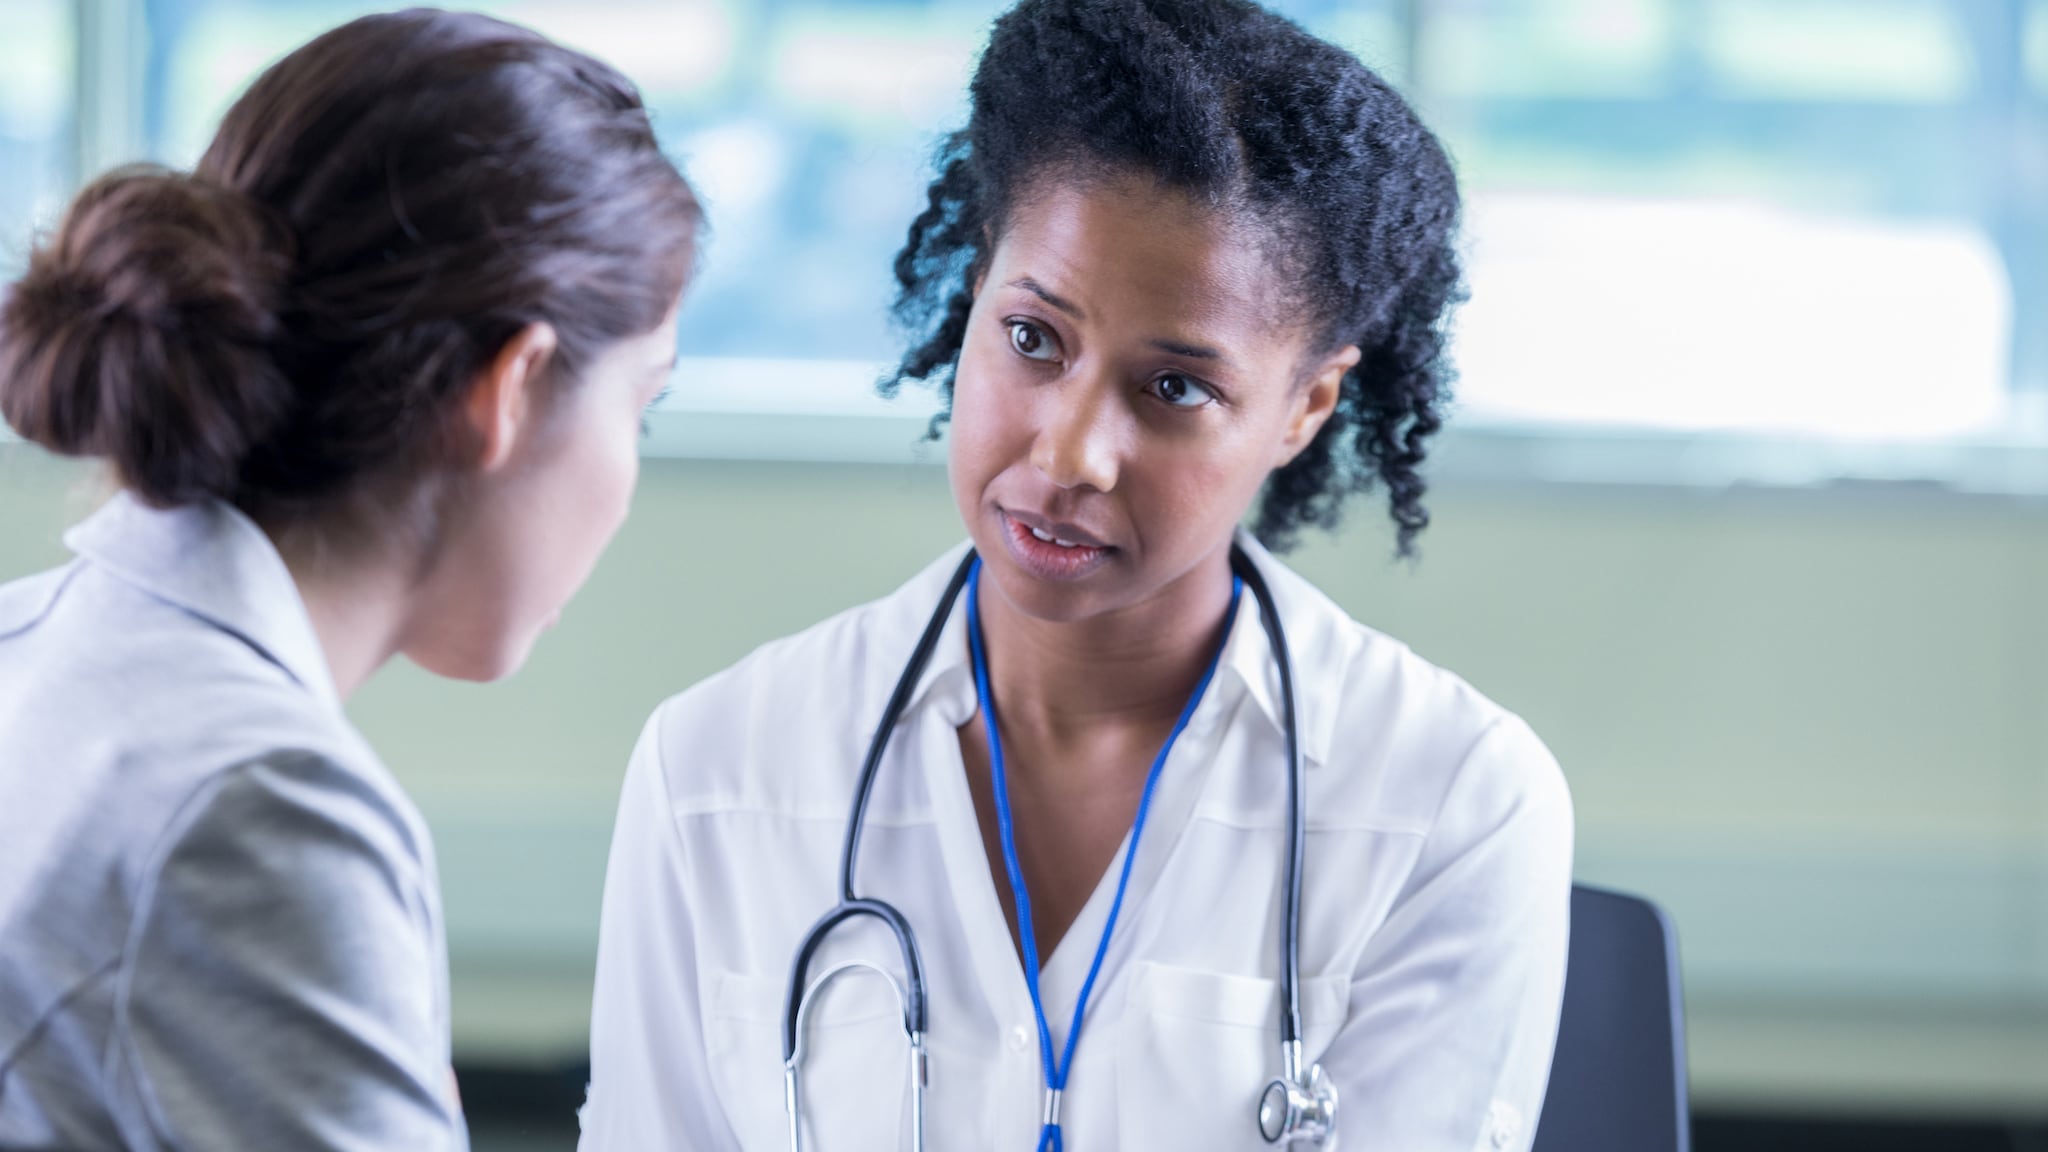 A female doctor talks to a patient